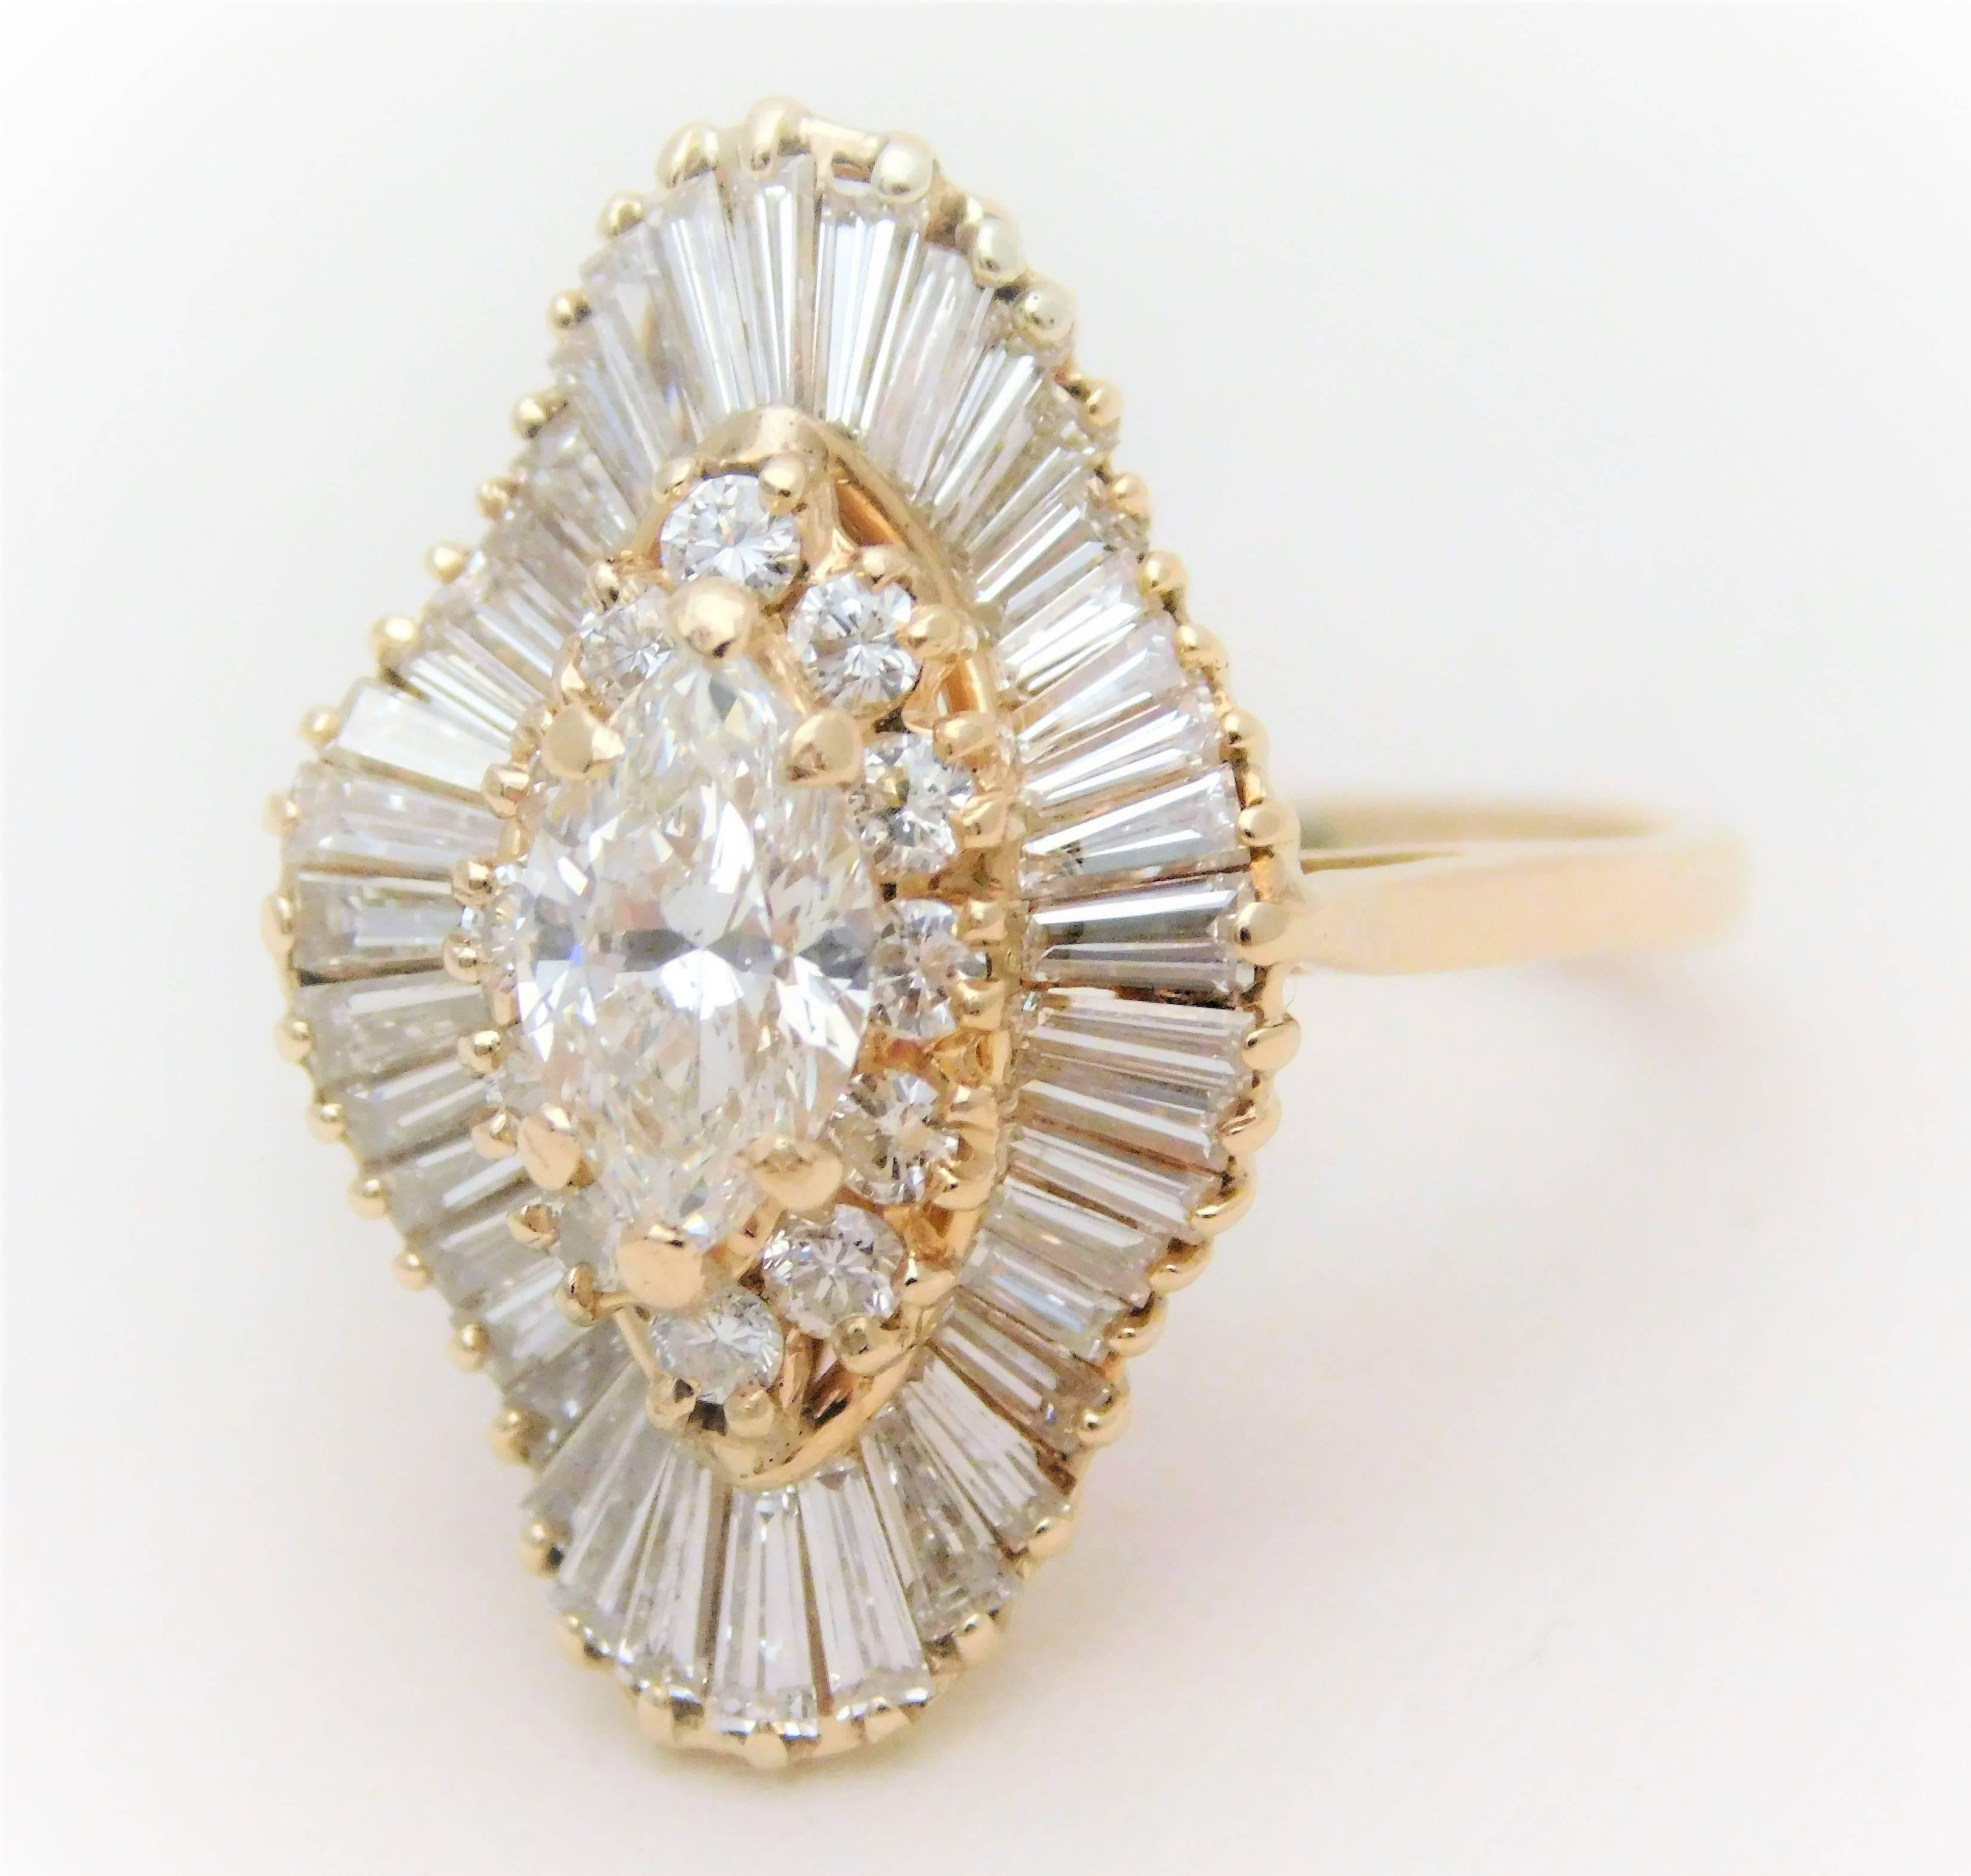 From an elegant New Orleans estate. This dazzling ring is made of solid 14k yellow gold. The style of this unique cluster-style ring is called ballerina due to all of its tapered baguettes flowing like a ballerina’s skirt. The style represents a